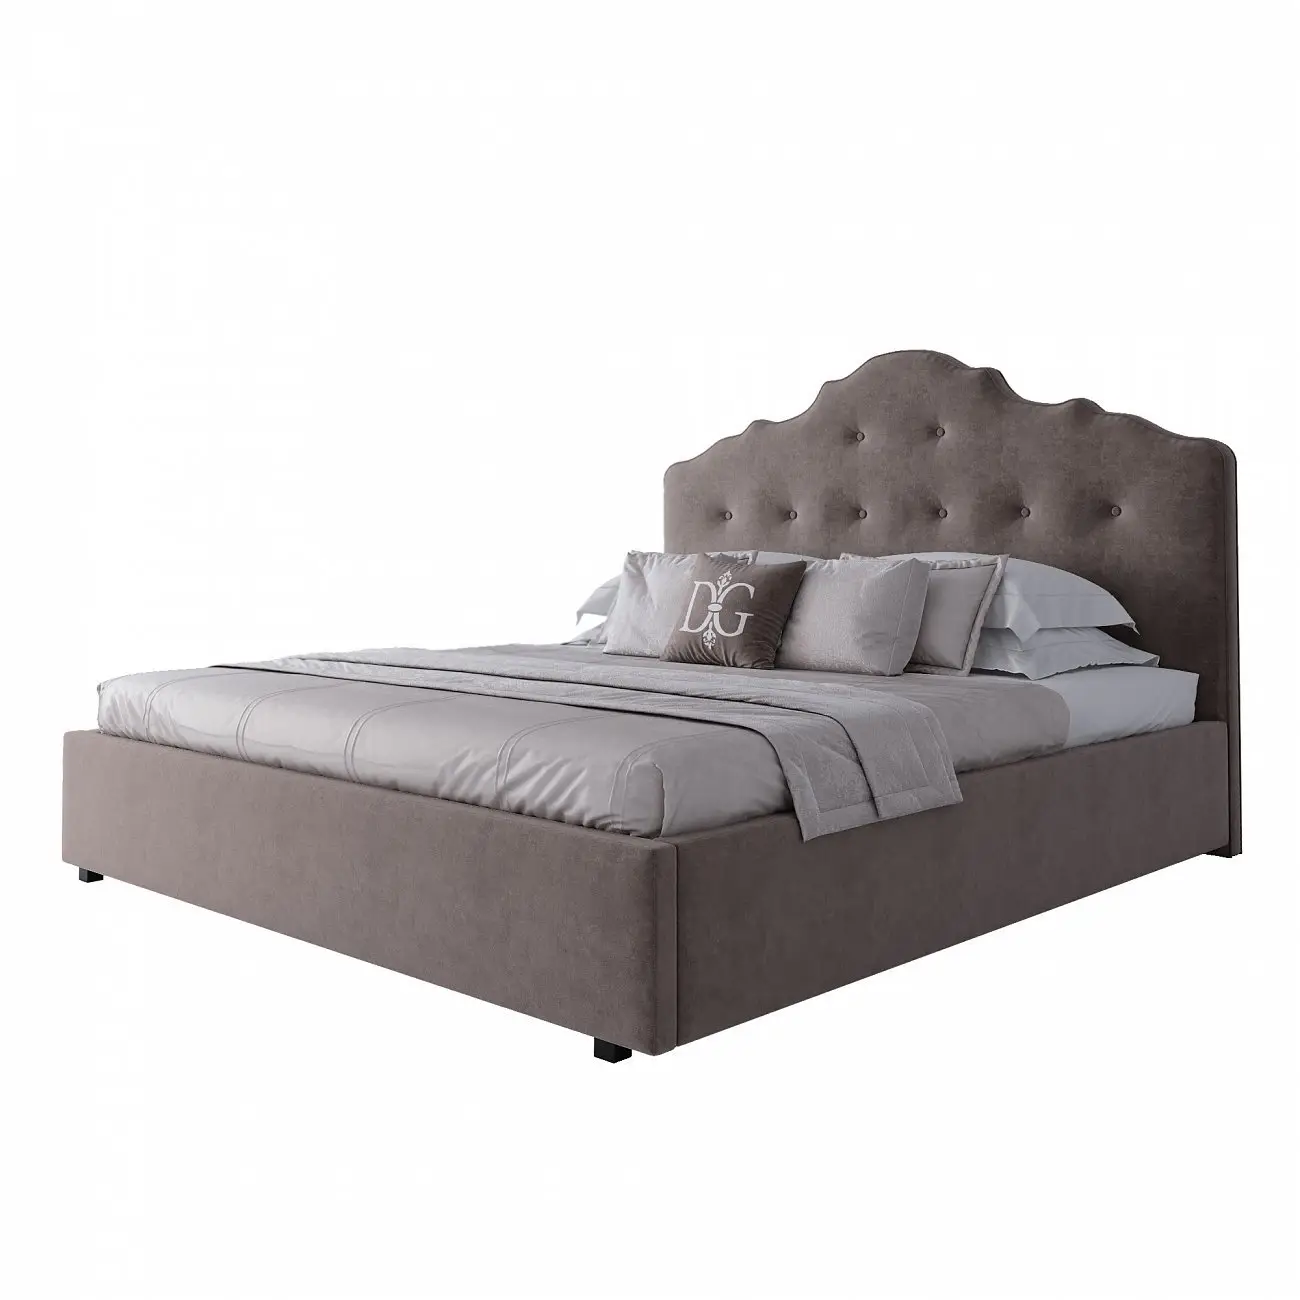 Double bed 180x200 cm grey-brown Palace